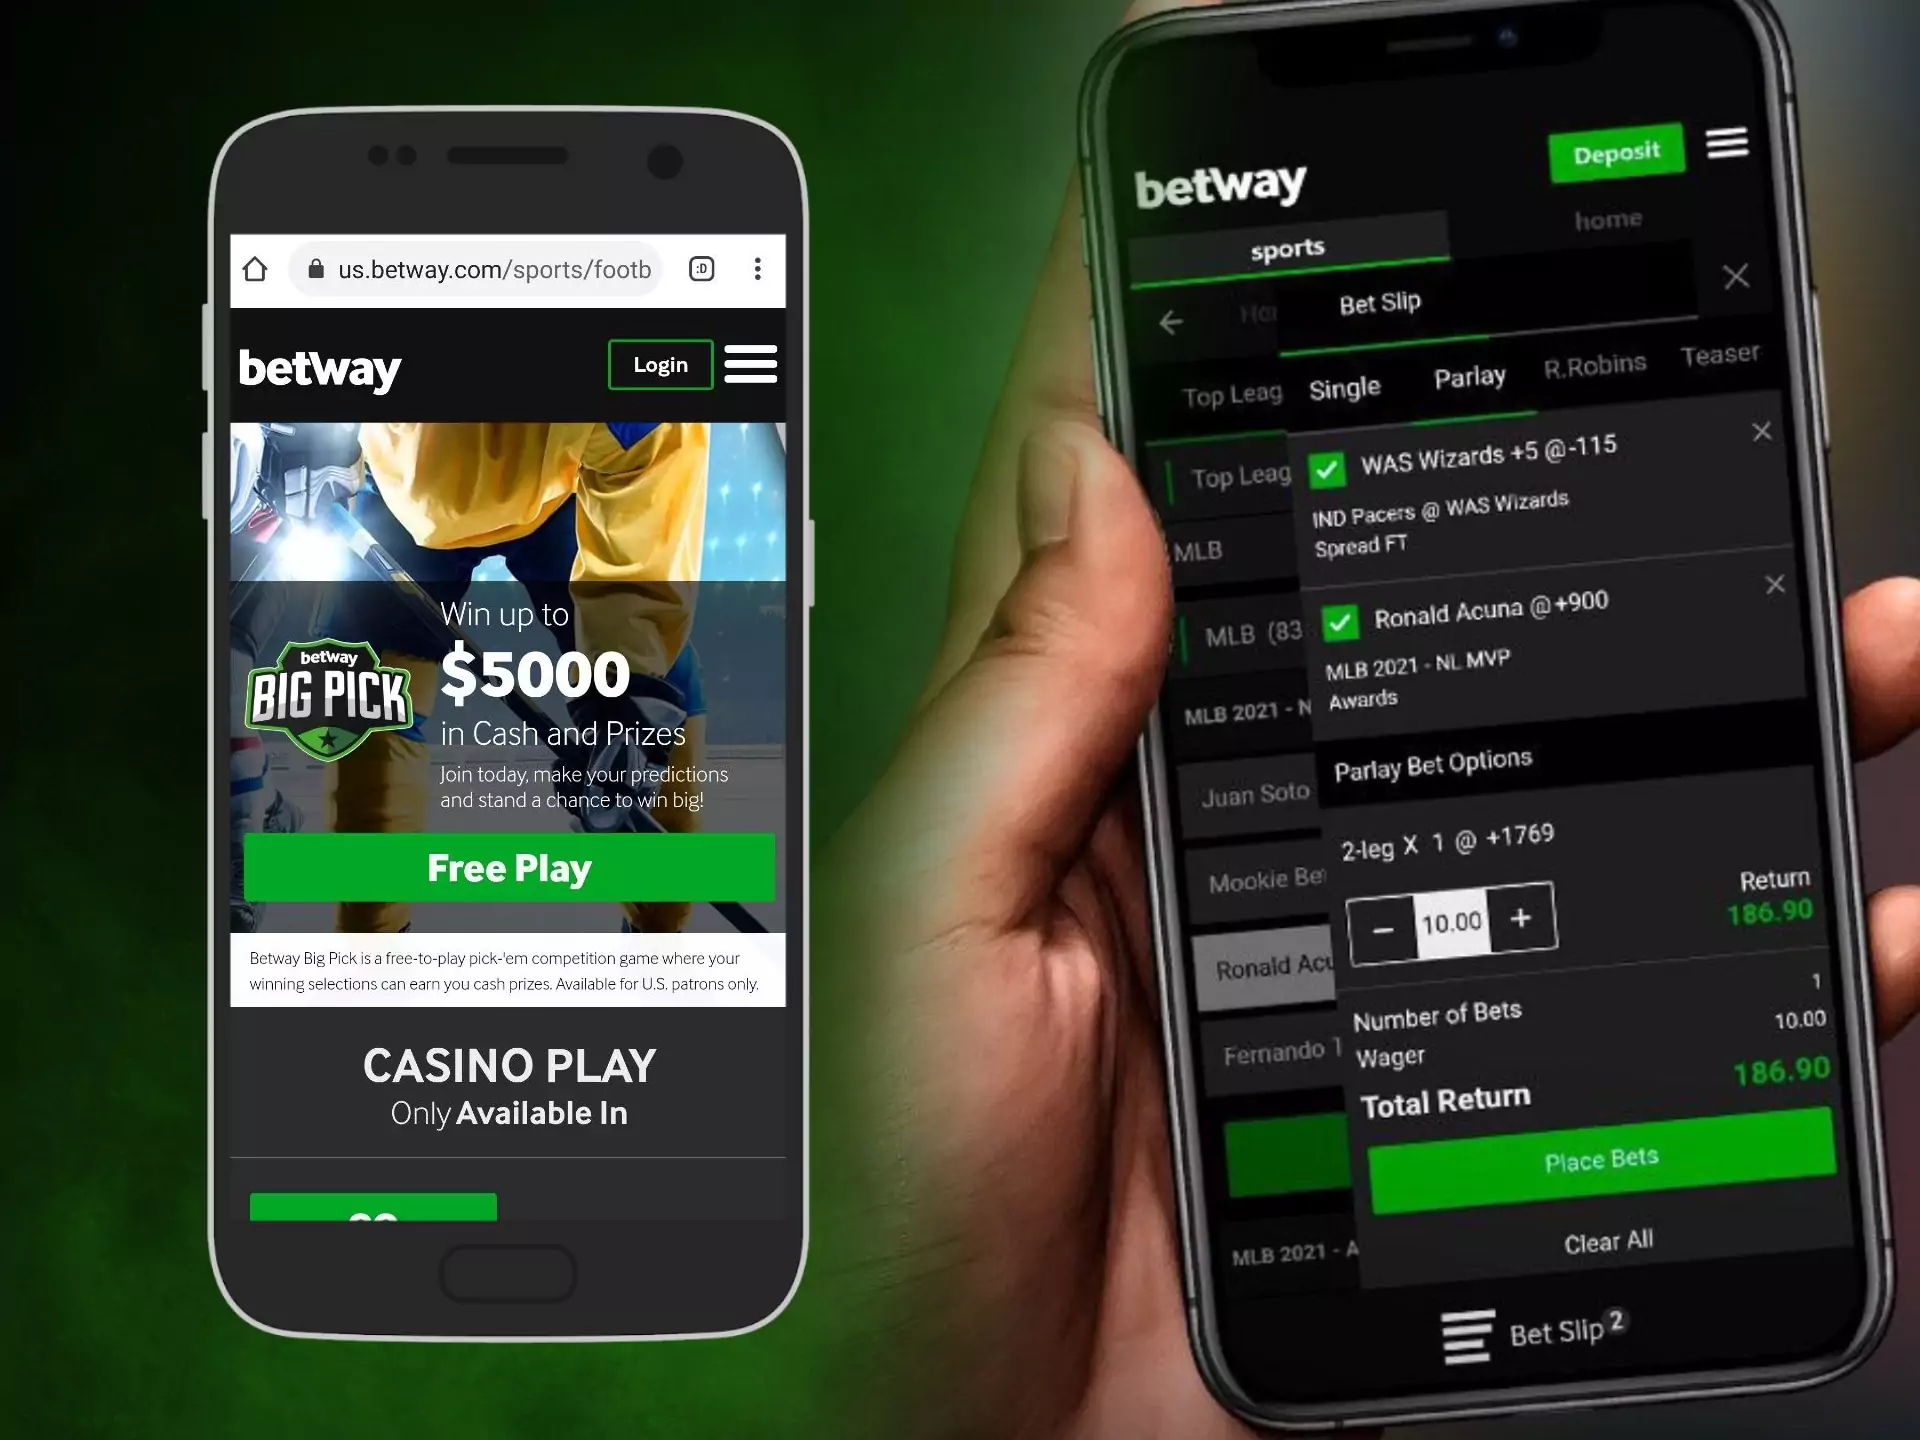 You'd better install the Betway app to have a quick access to cricket betting.